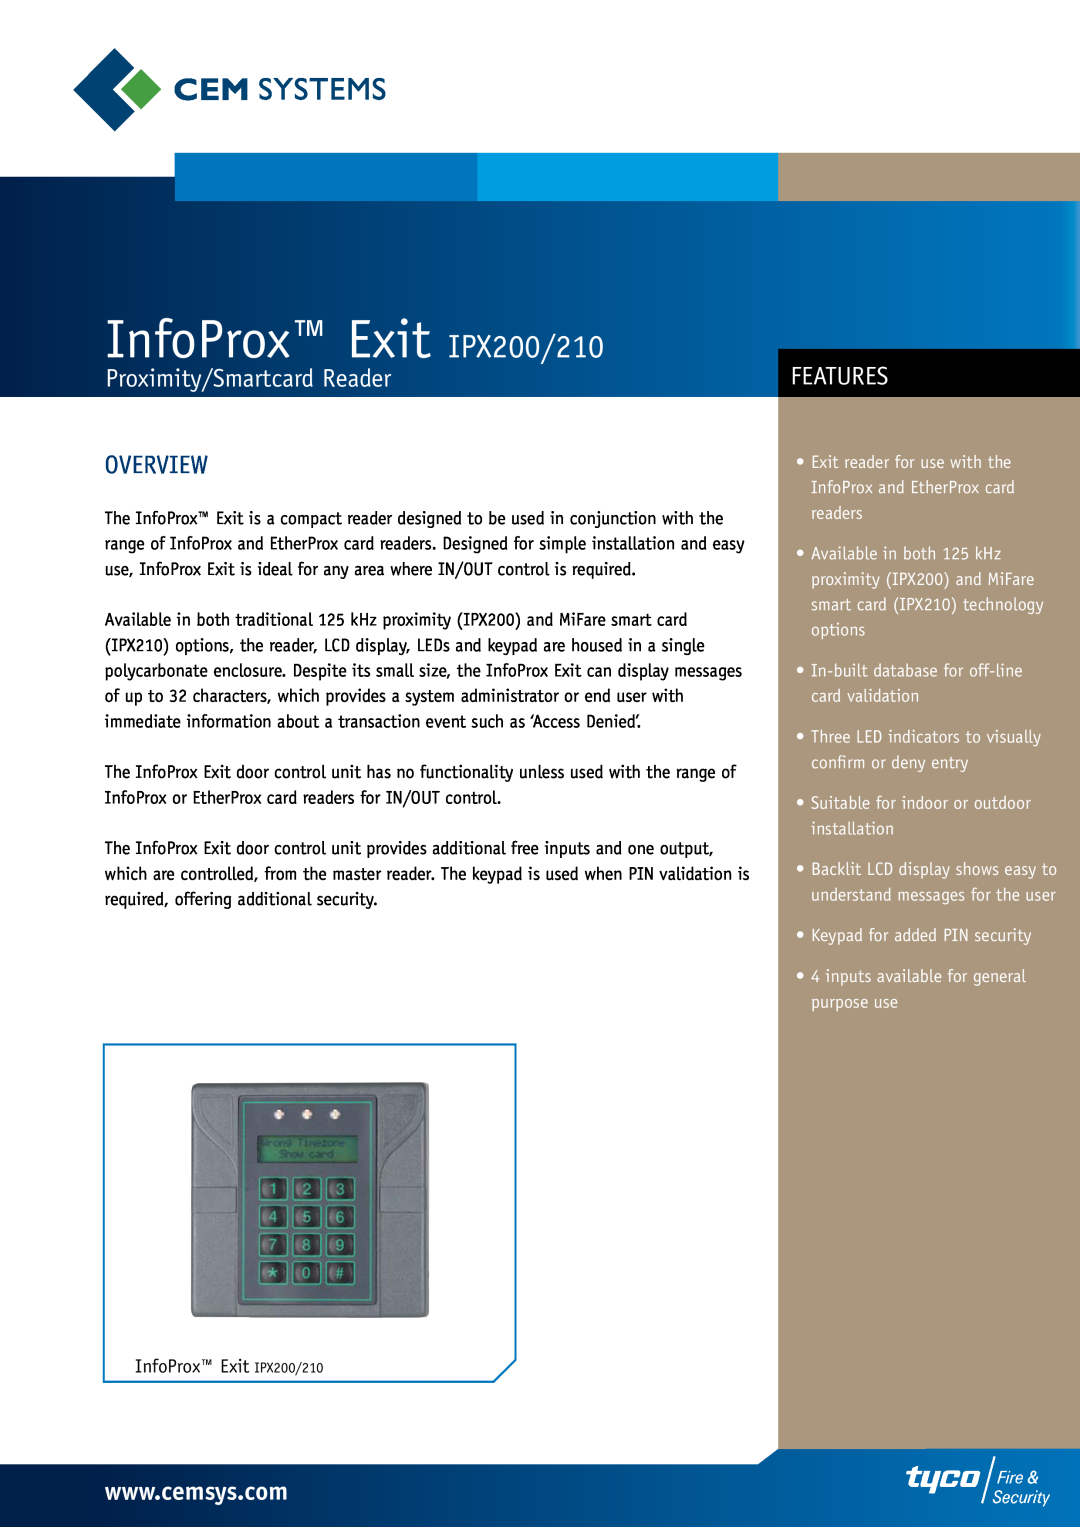 Tyco manual Proximity/Smartcard Reader, InfoProx Exit IPX200/210, Overview, Features, Keypad for added PIN security 